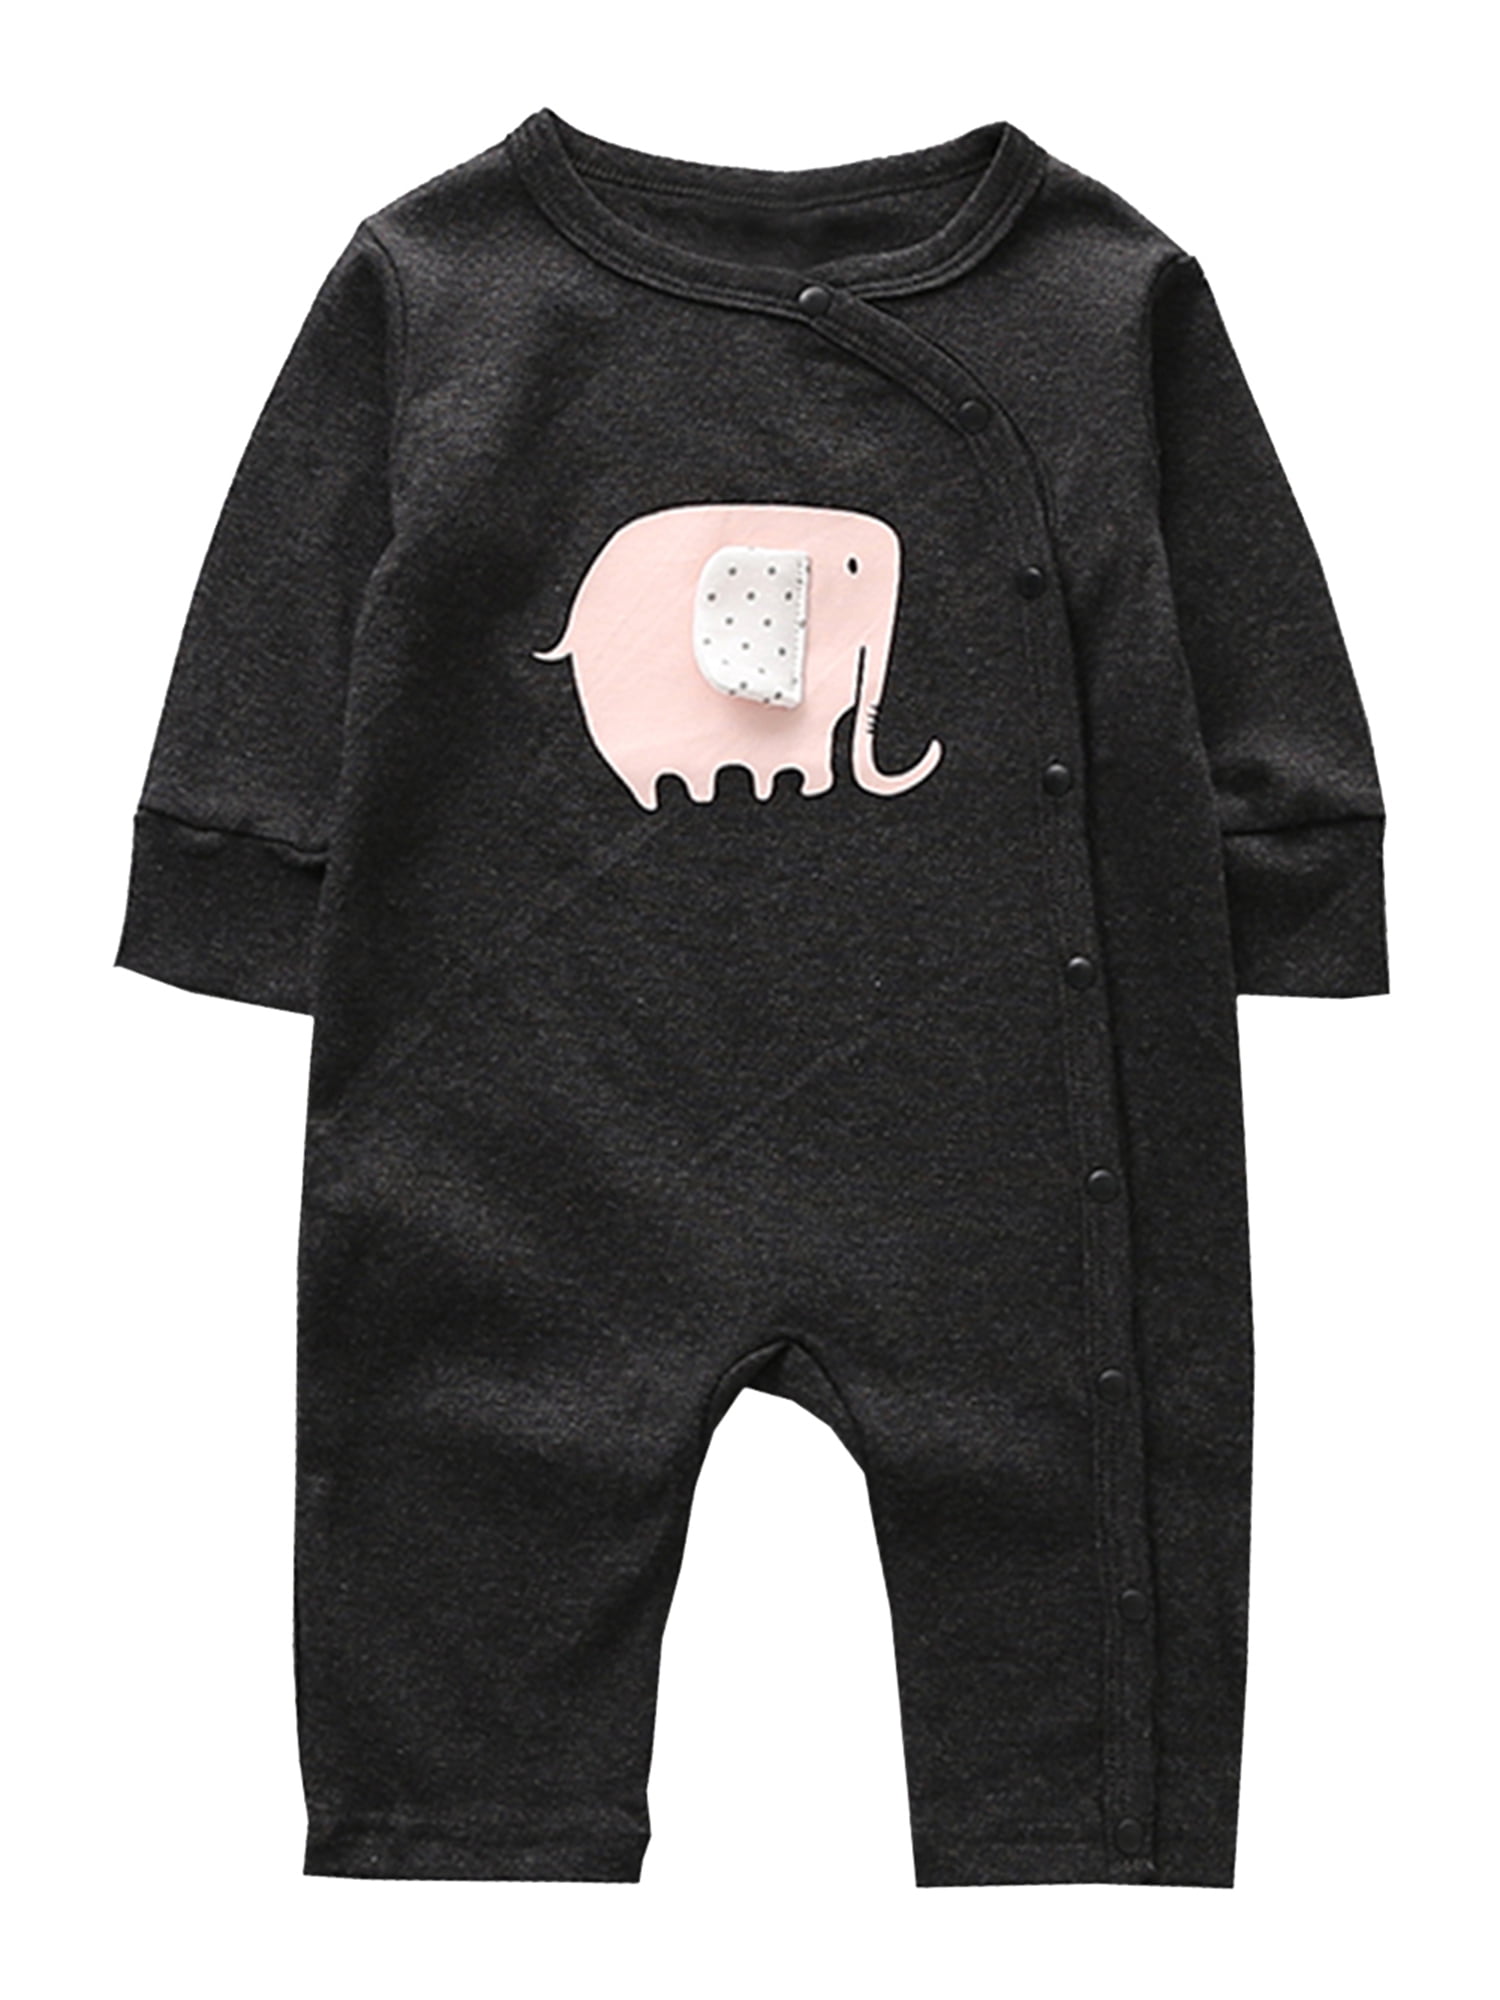 3-24M Details about   StylesILove Infant Toddler Baby Boy Deer Print Grey Cotton Hooded Romper 